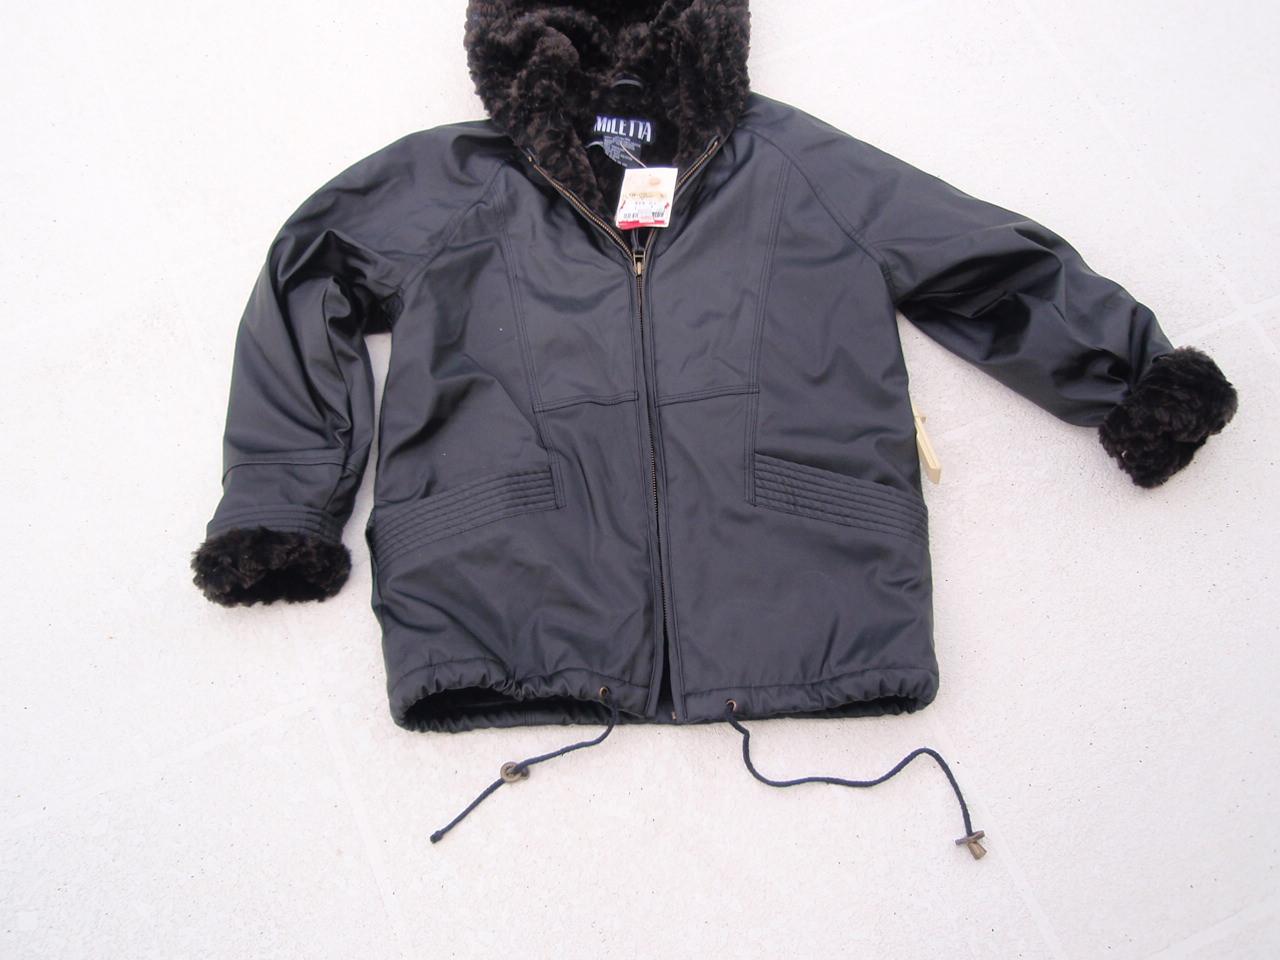 Children's Hooded Jackets and Sweatshirts with Drawstrings Recalled By ...